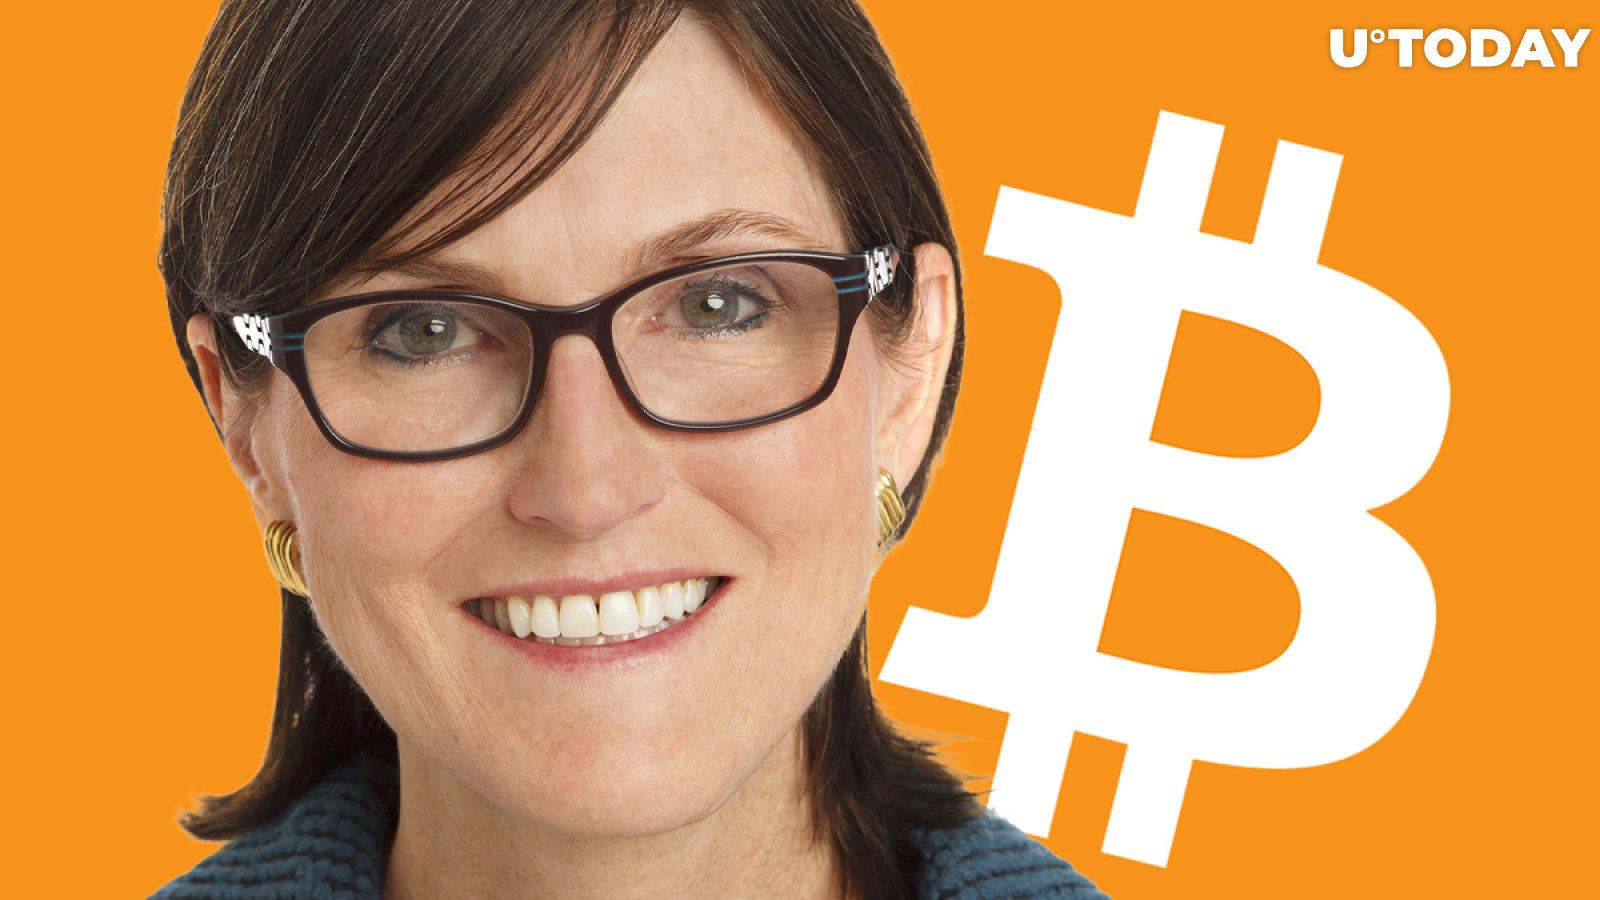 As Bitcoin Rallies Back to $51K, Ark's Cathie Wood Says She's "Very Positive" on It